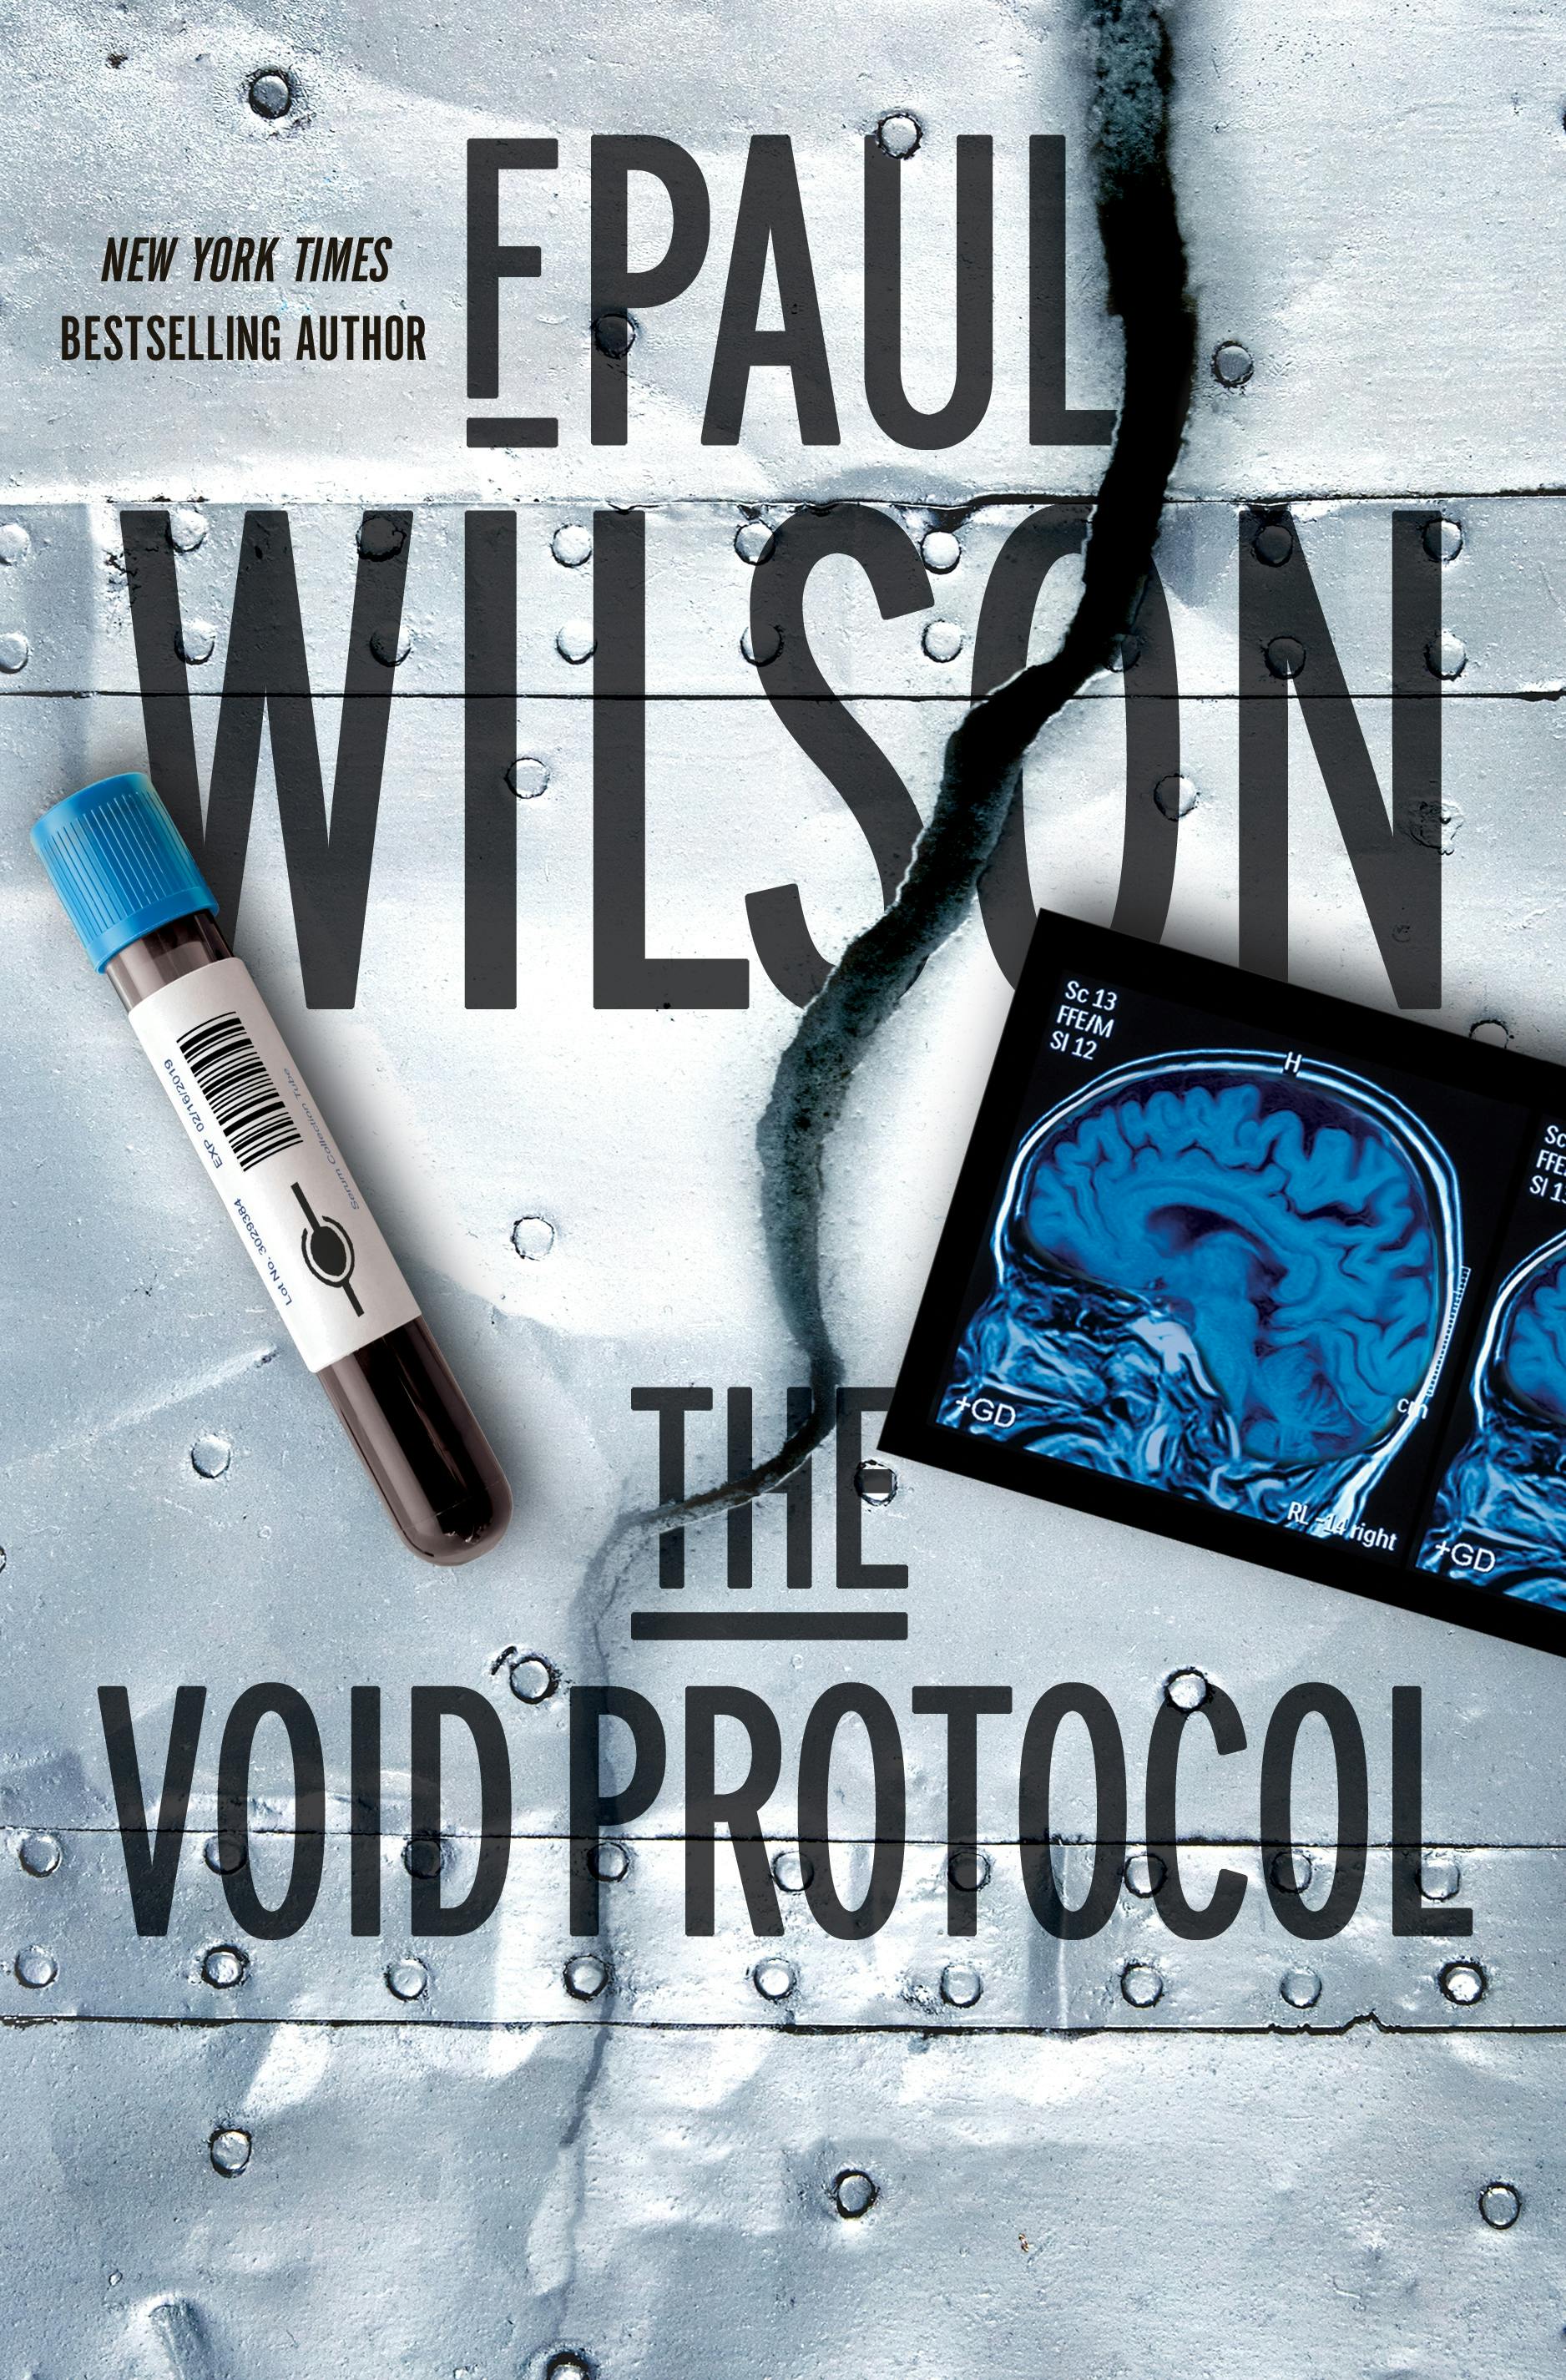 Cover for the book titled as: The Void Protocol